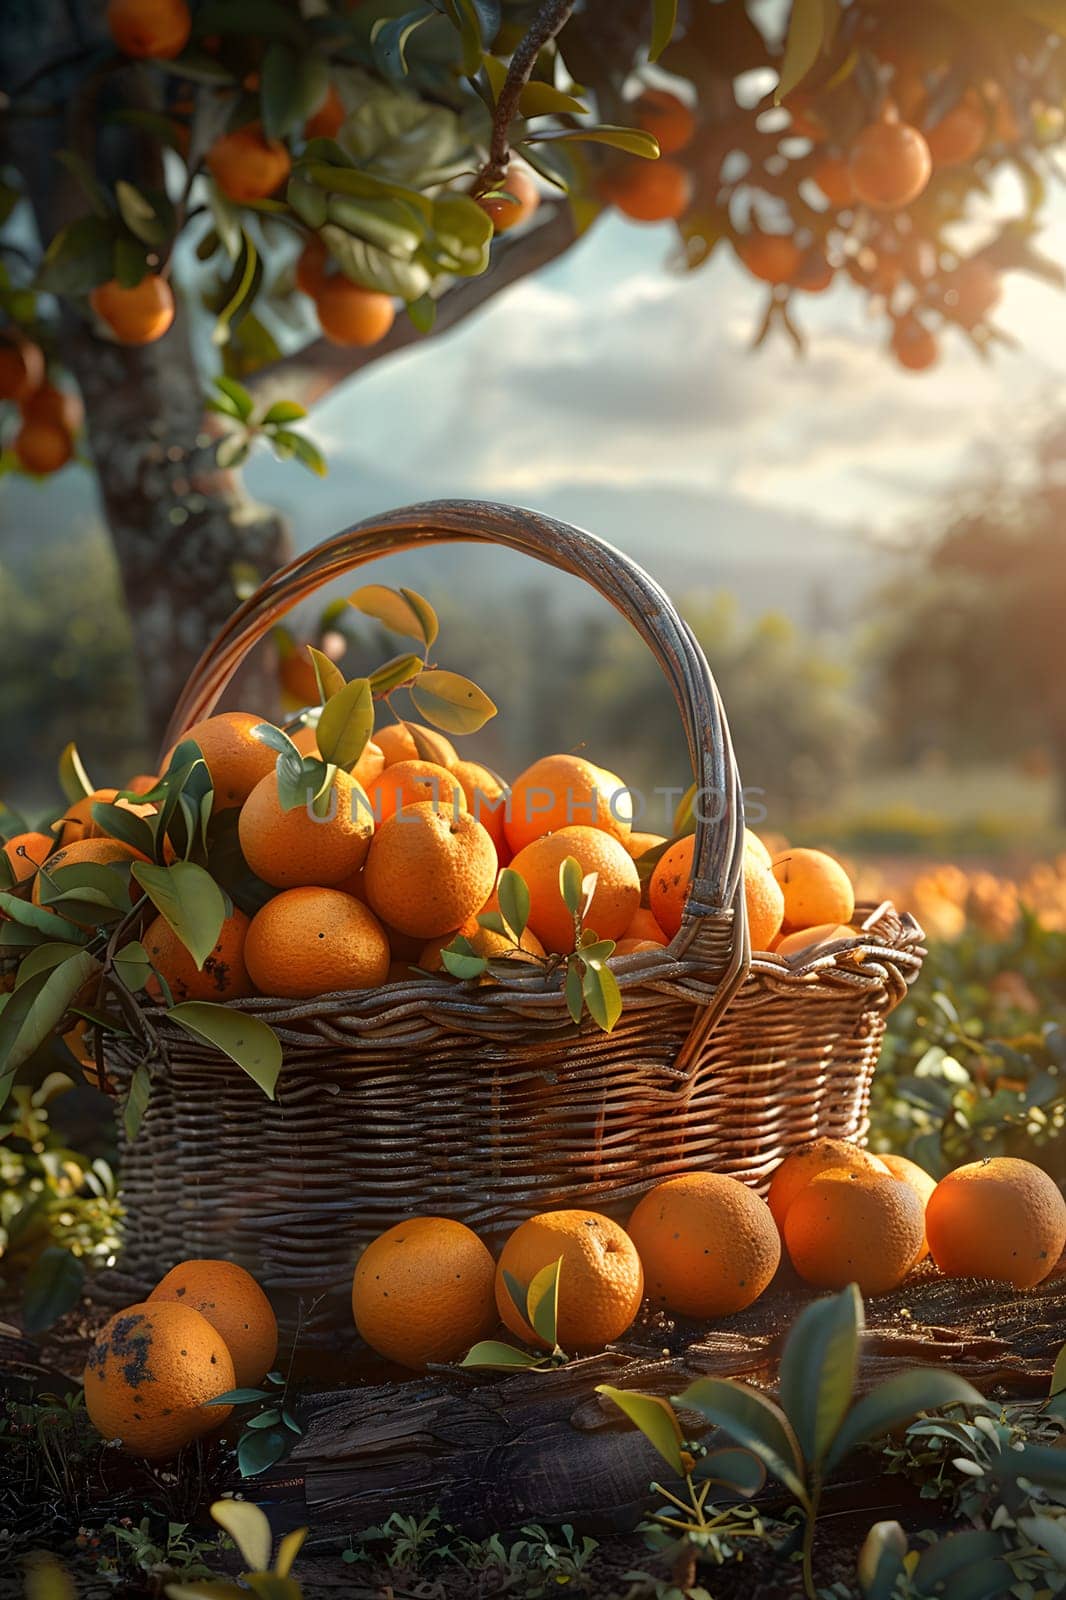 Basket of oranges under a Rangpur tree, natural food produce by Nadtochiy